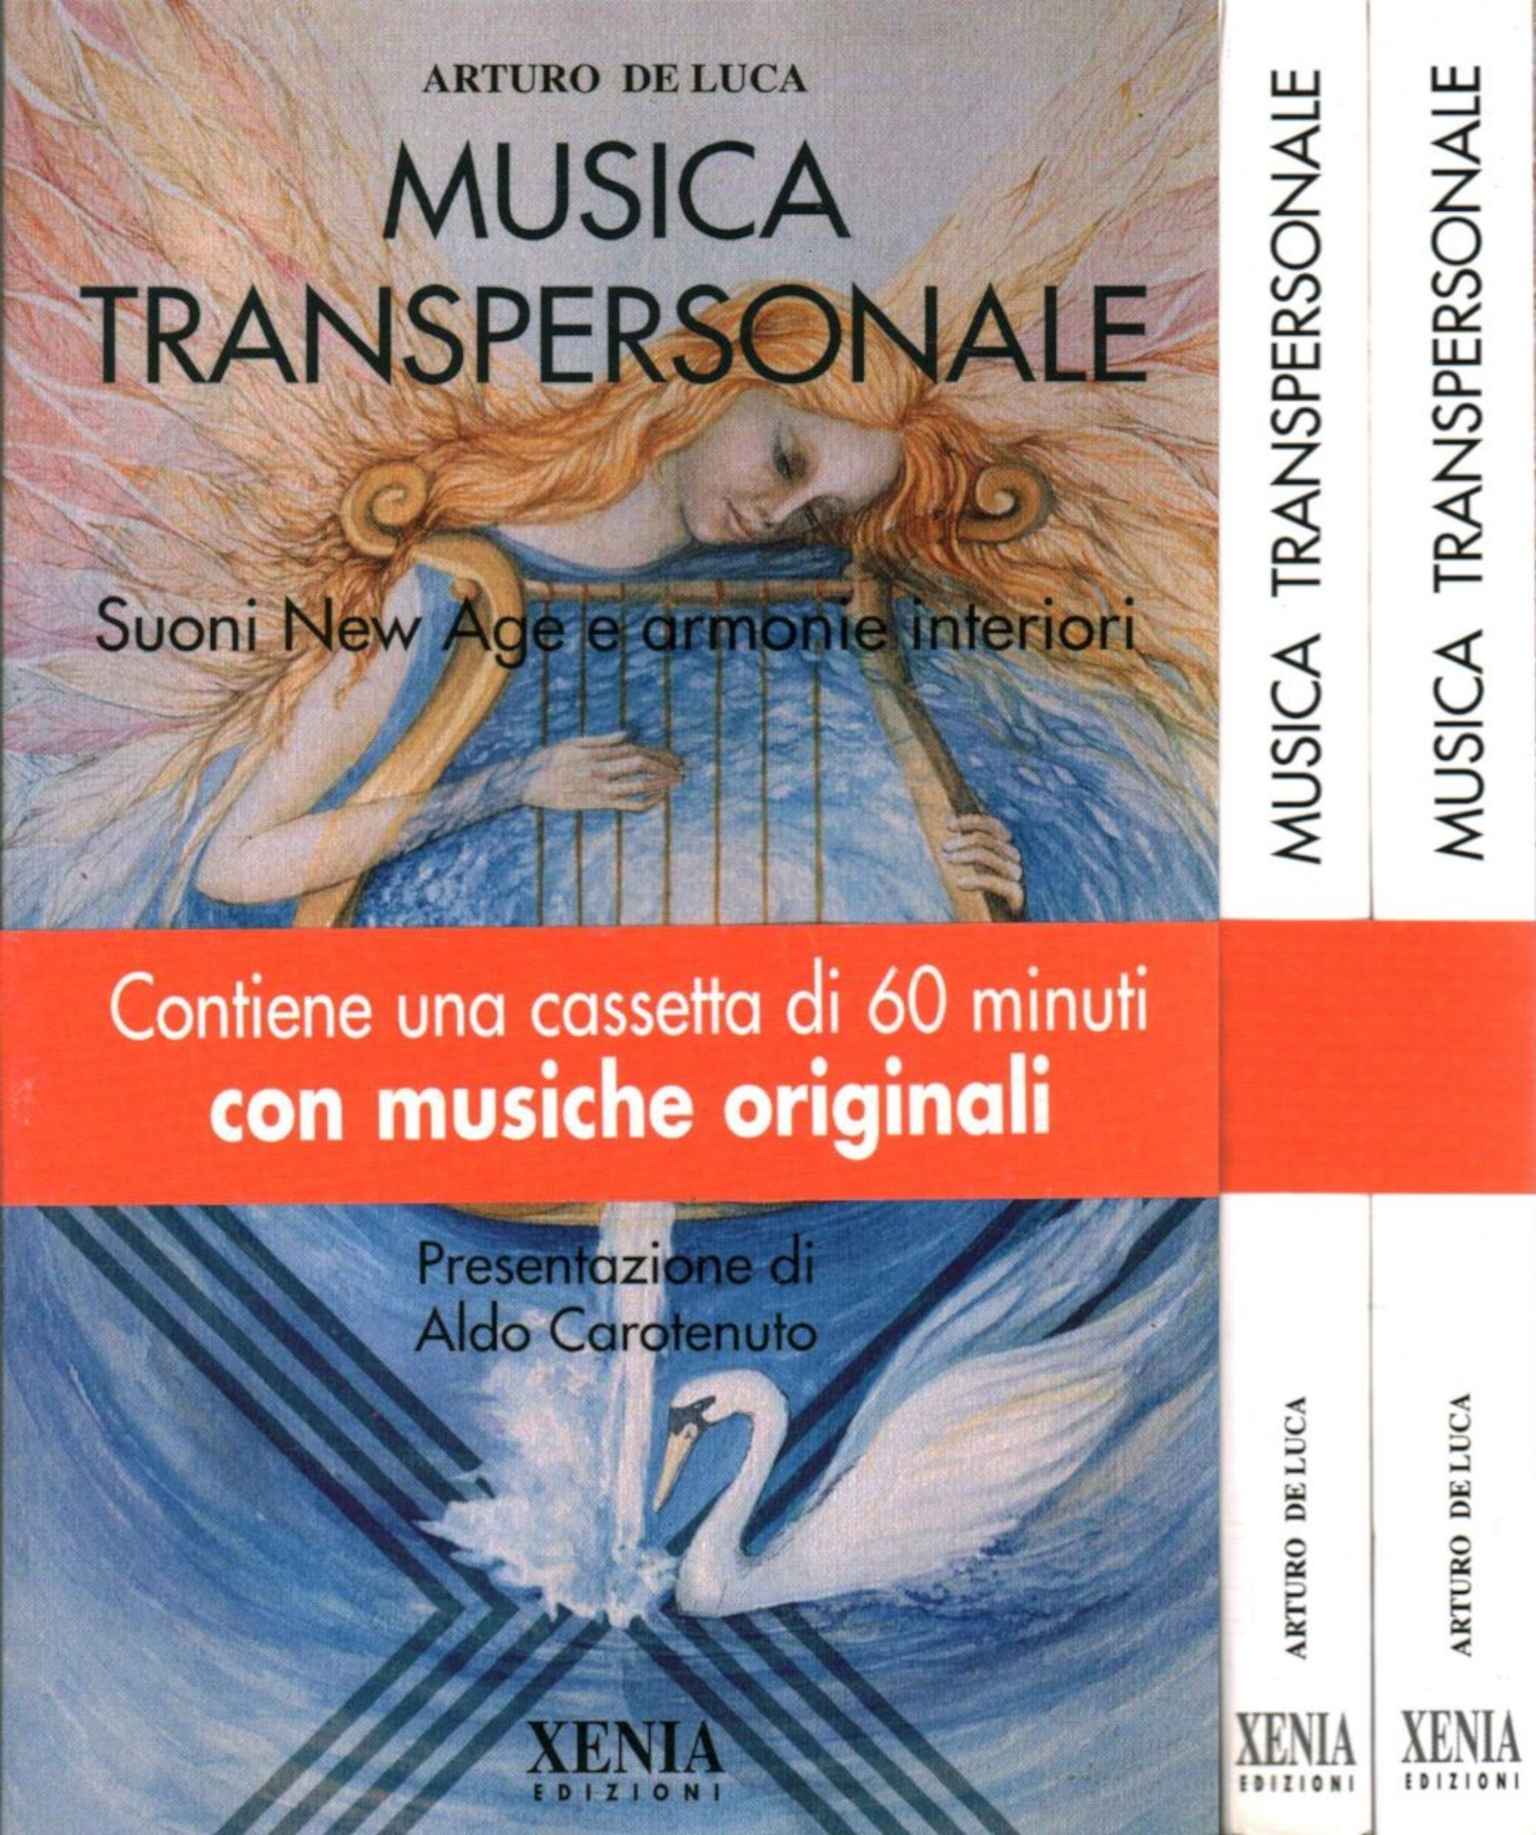 Transpersonal music (with cassette)